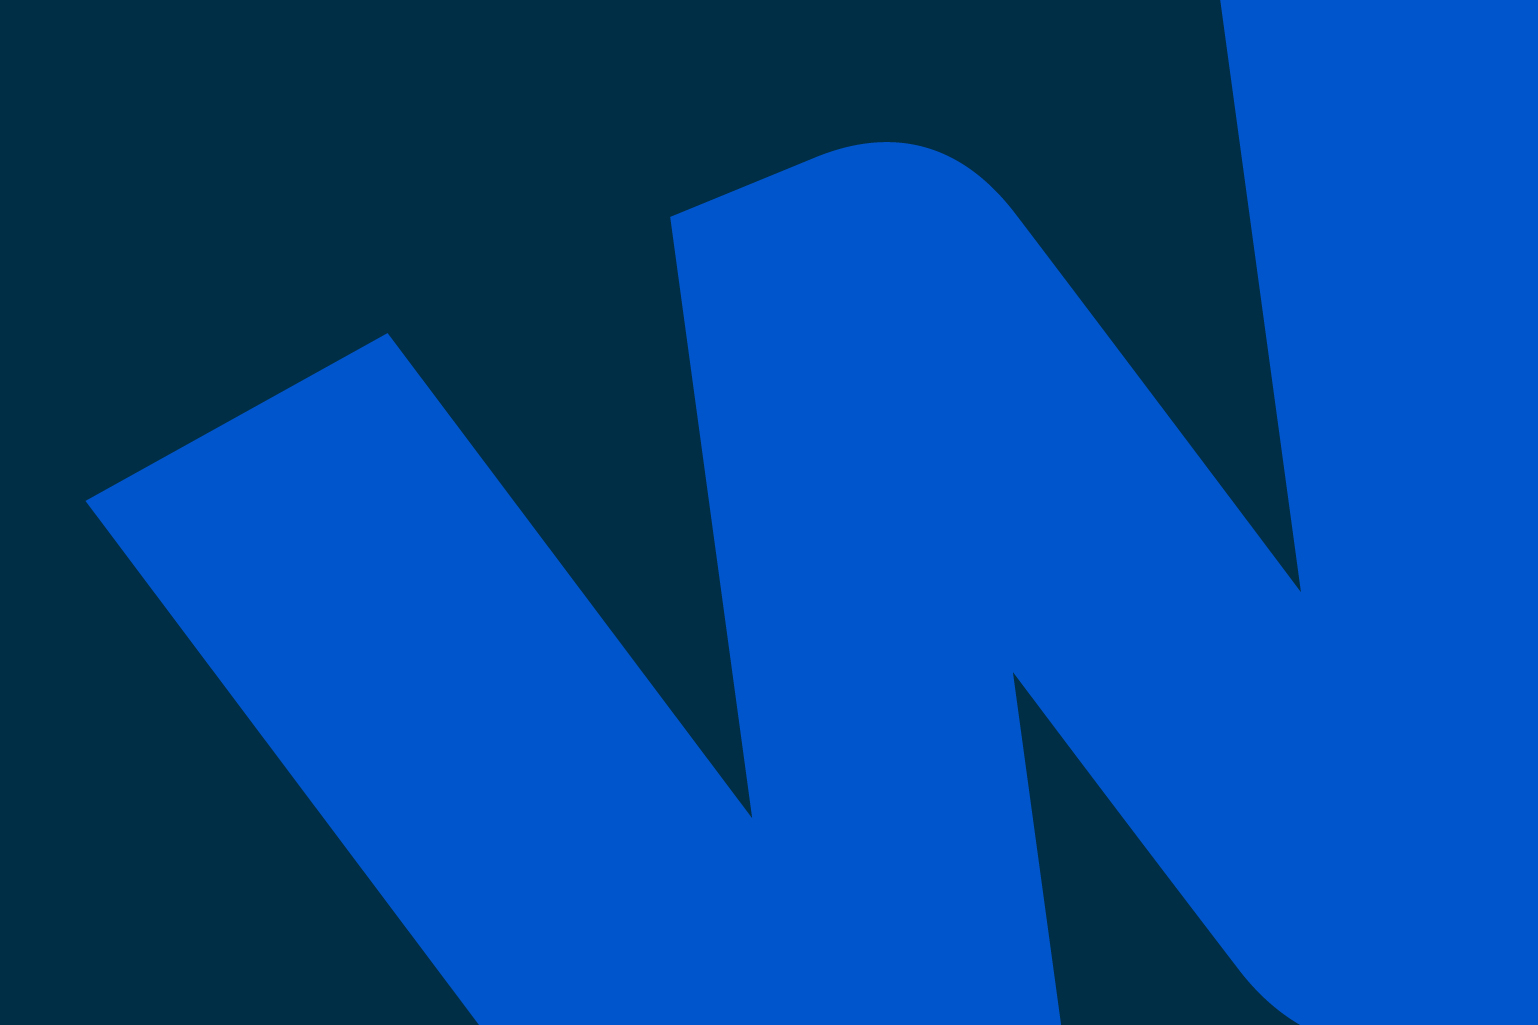 A bright blue letter W against a dark blue background.